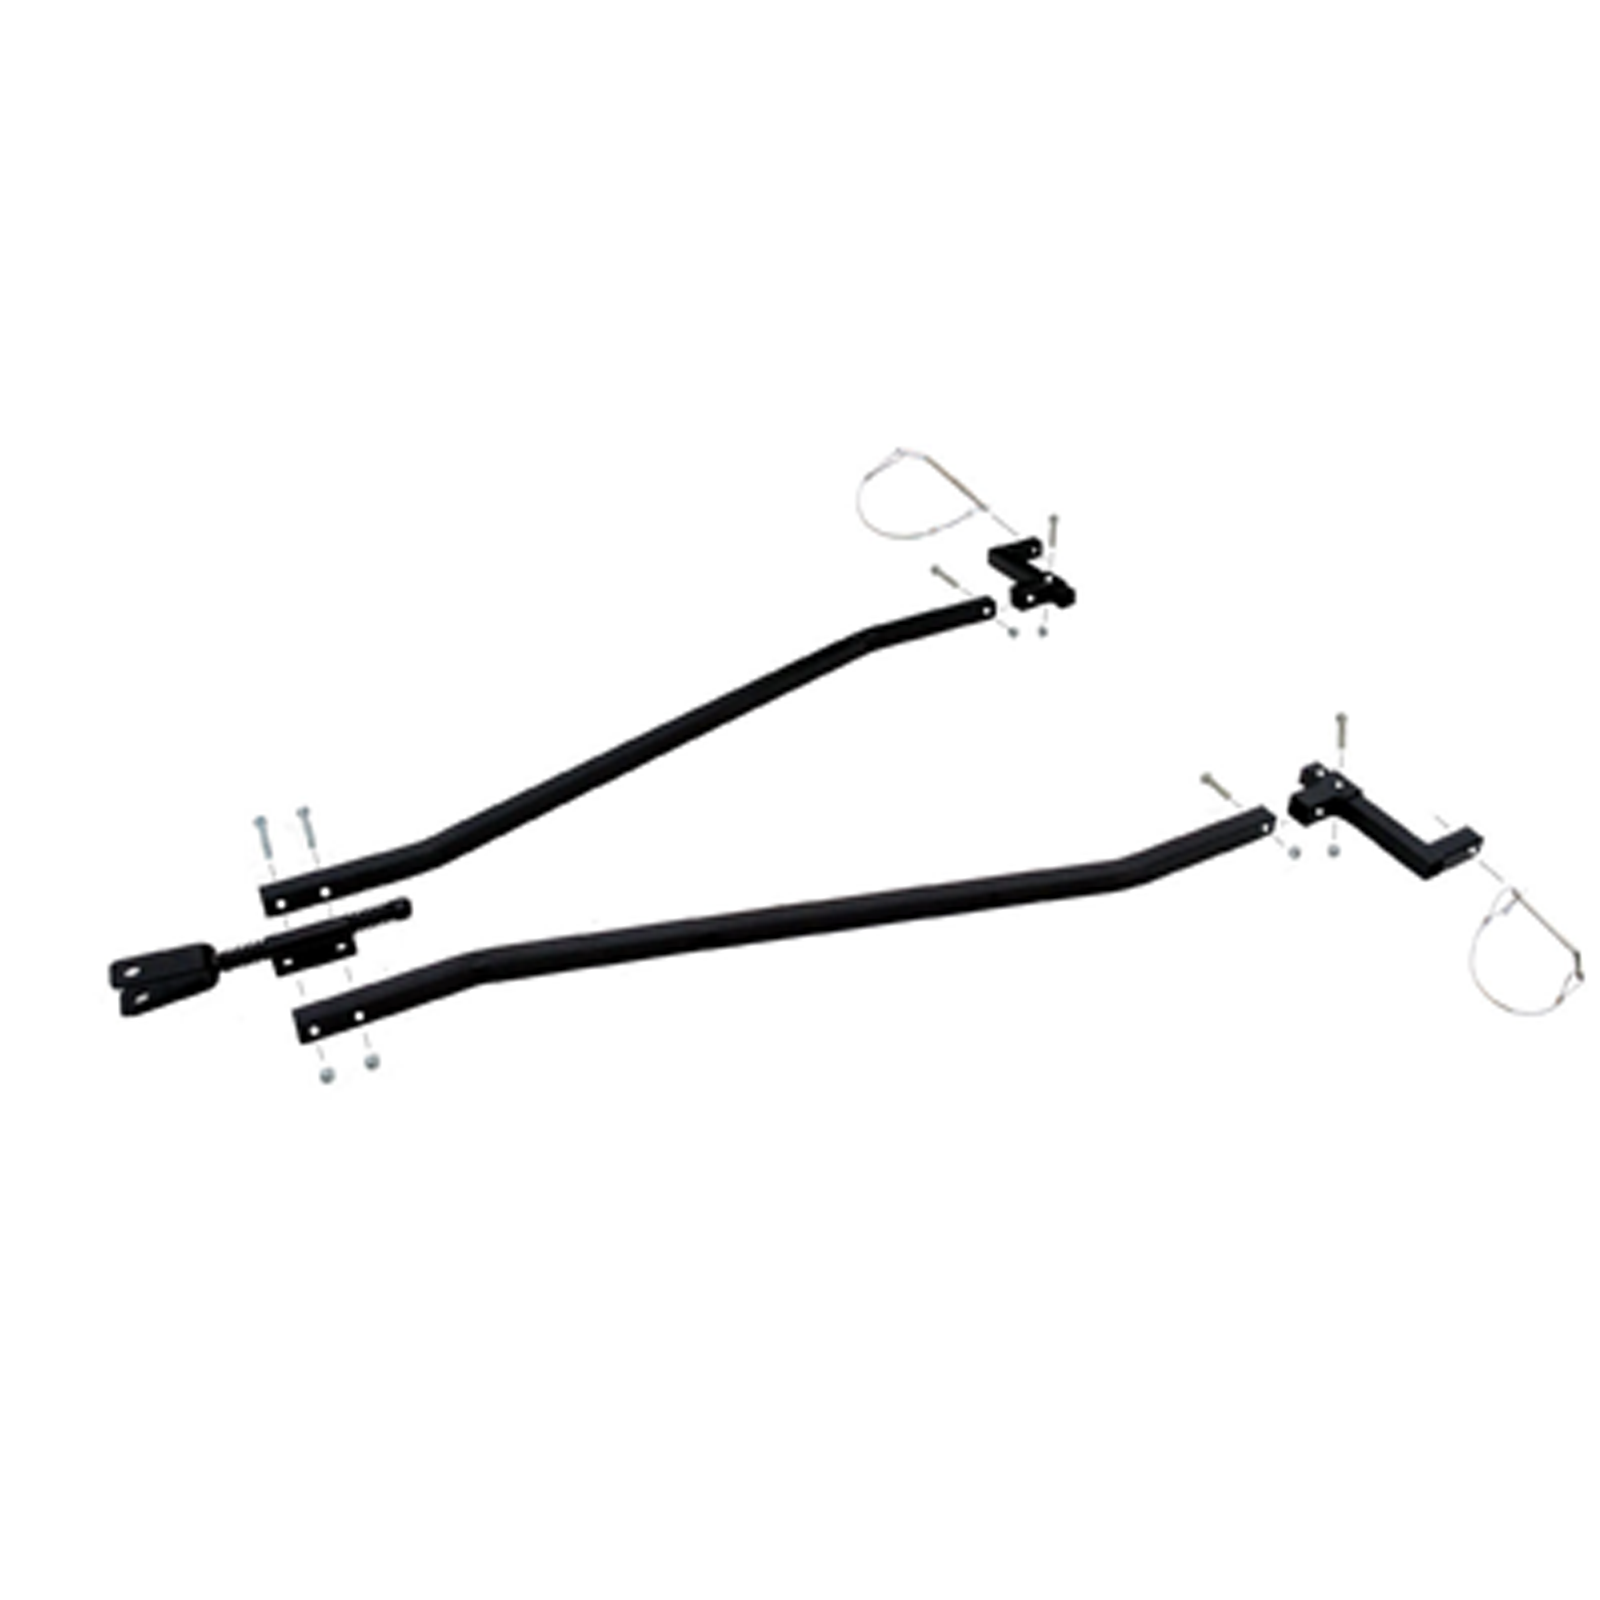 TROPHY ANGLER UNIVERSAL SLED HITCH